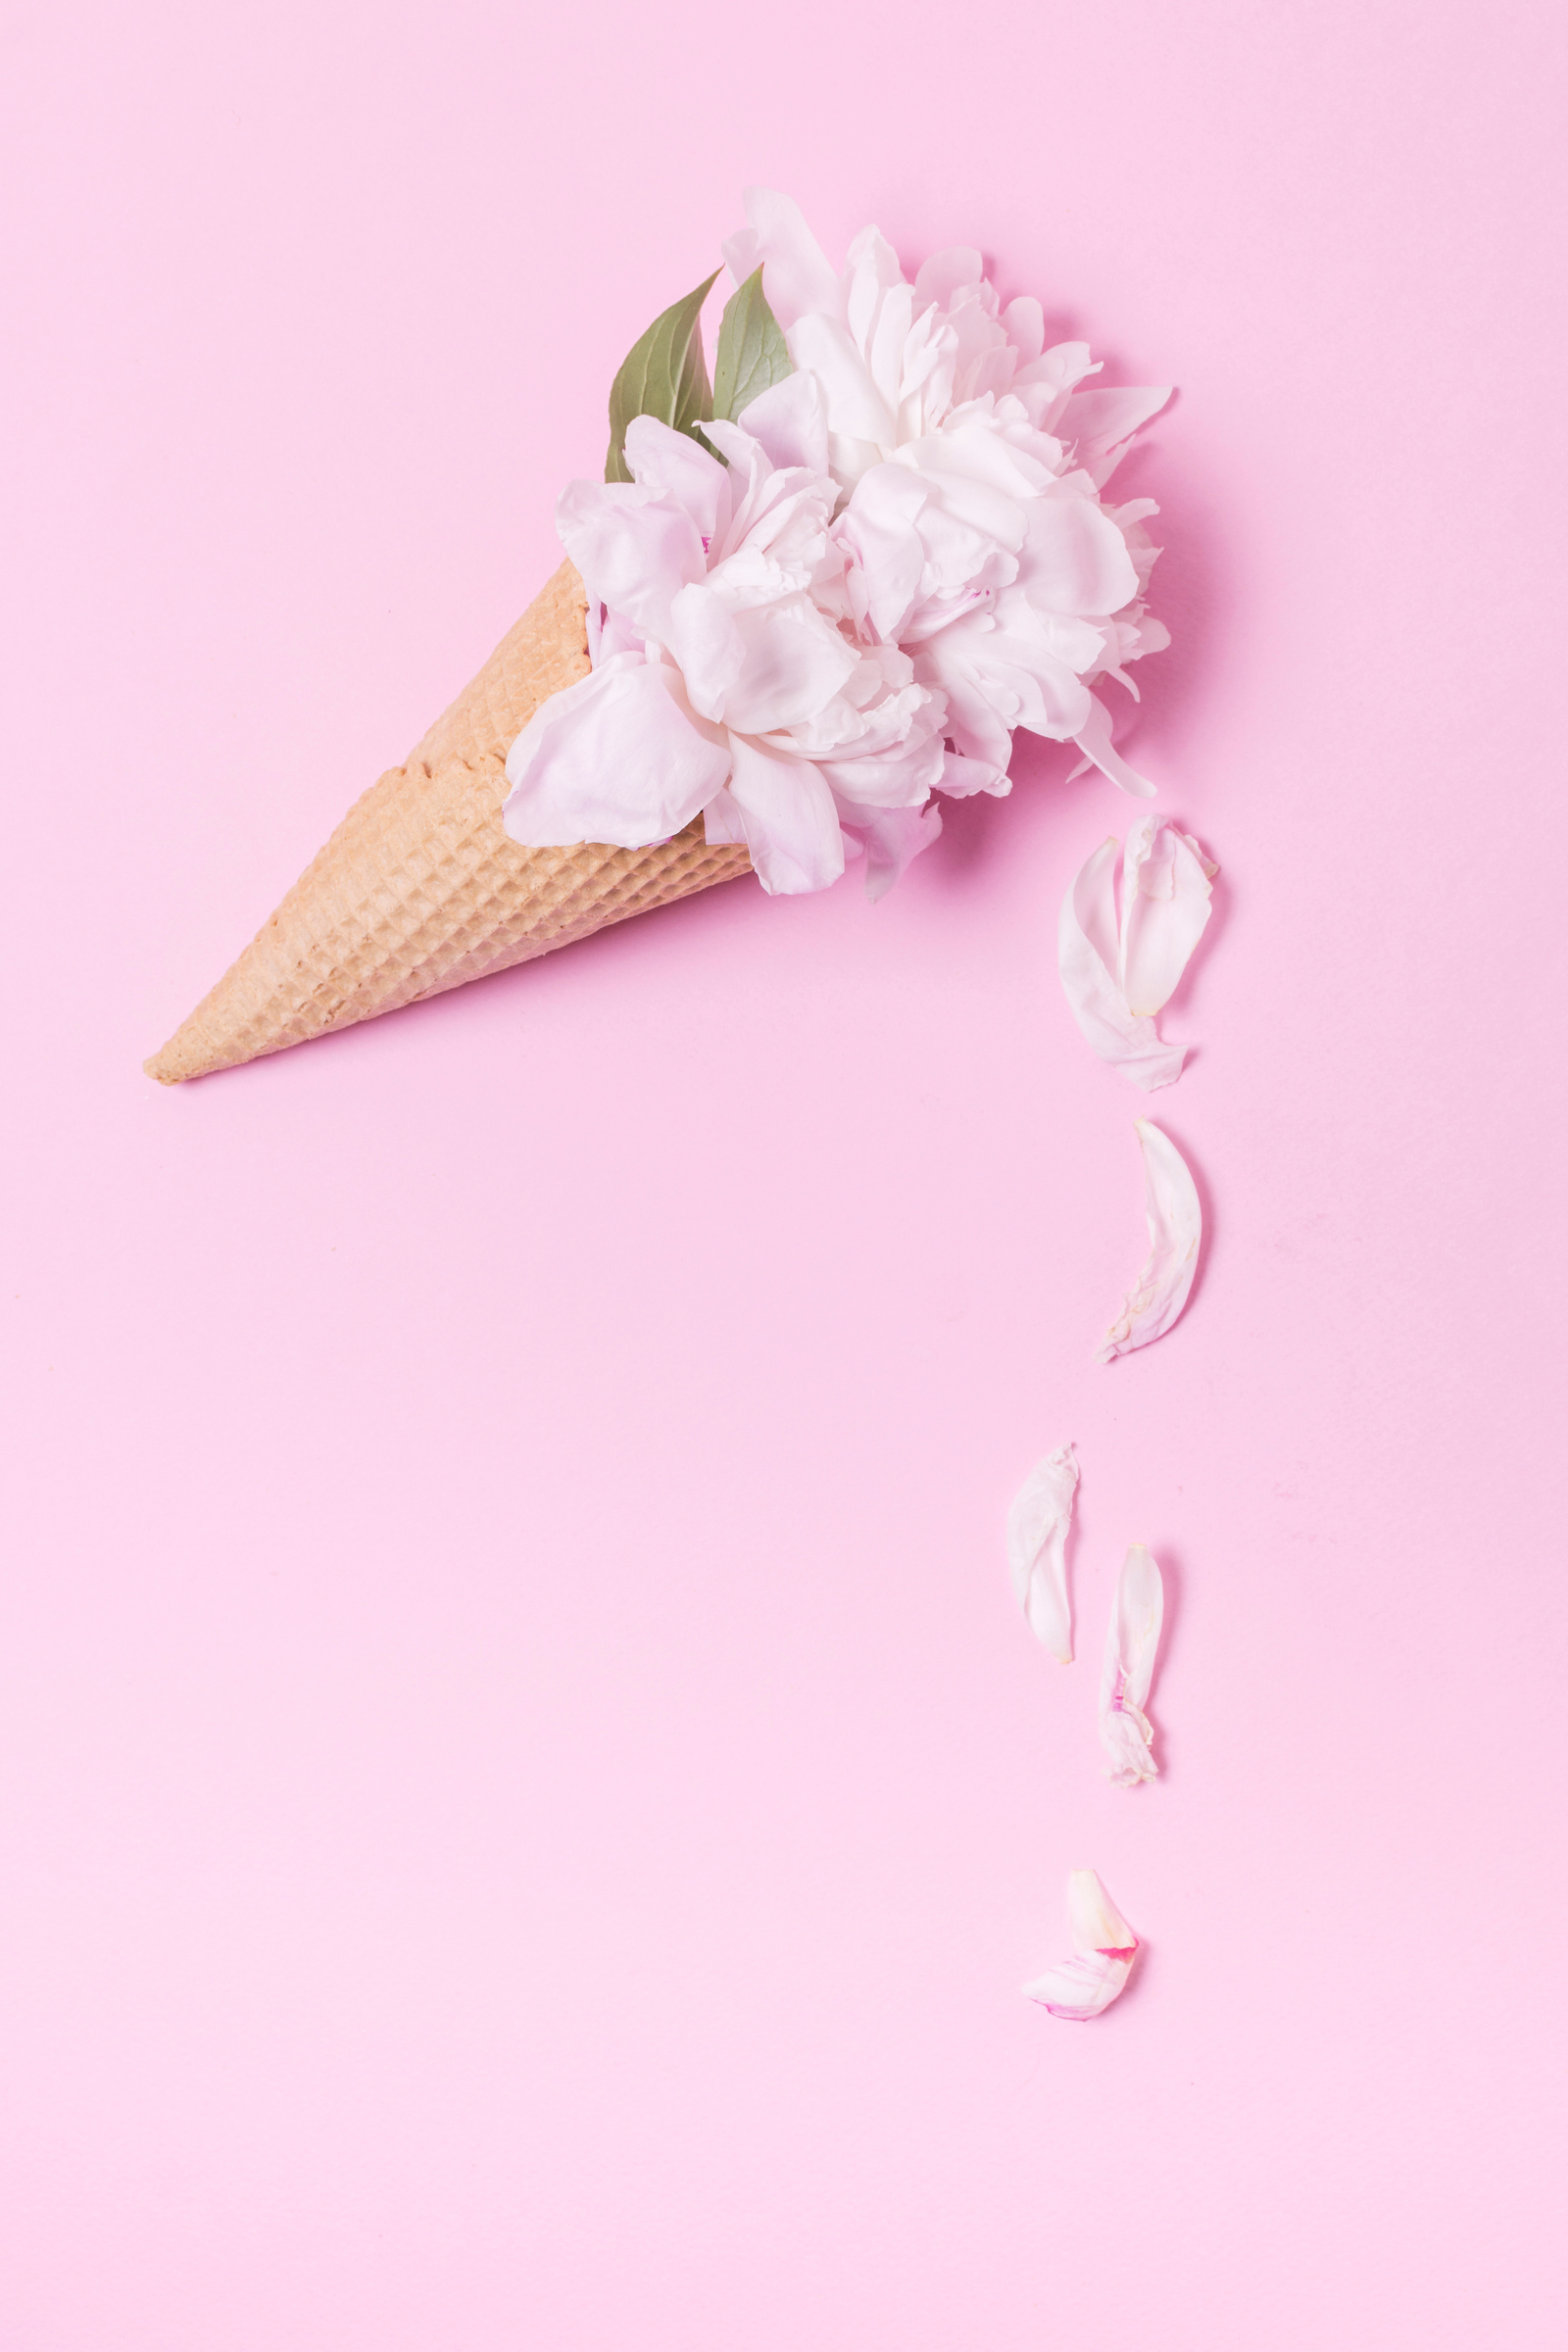 abstract floral ice cream cone with petals